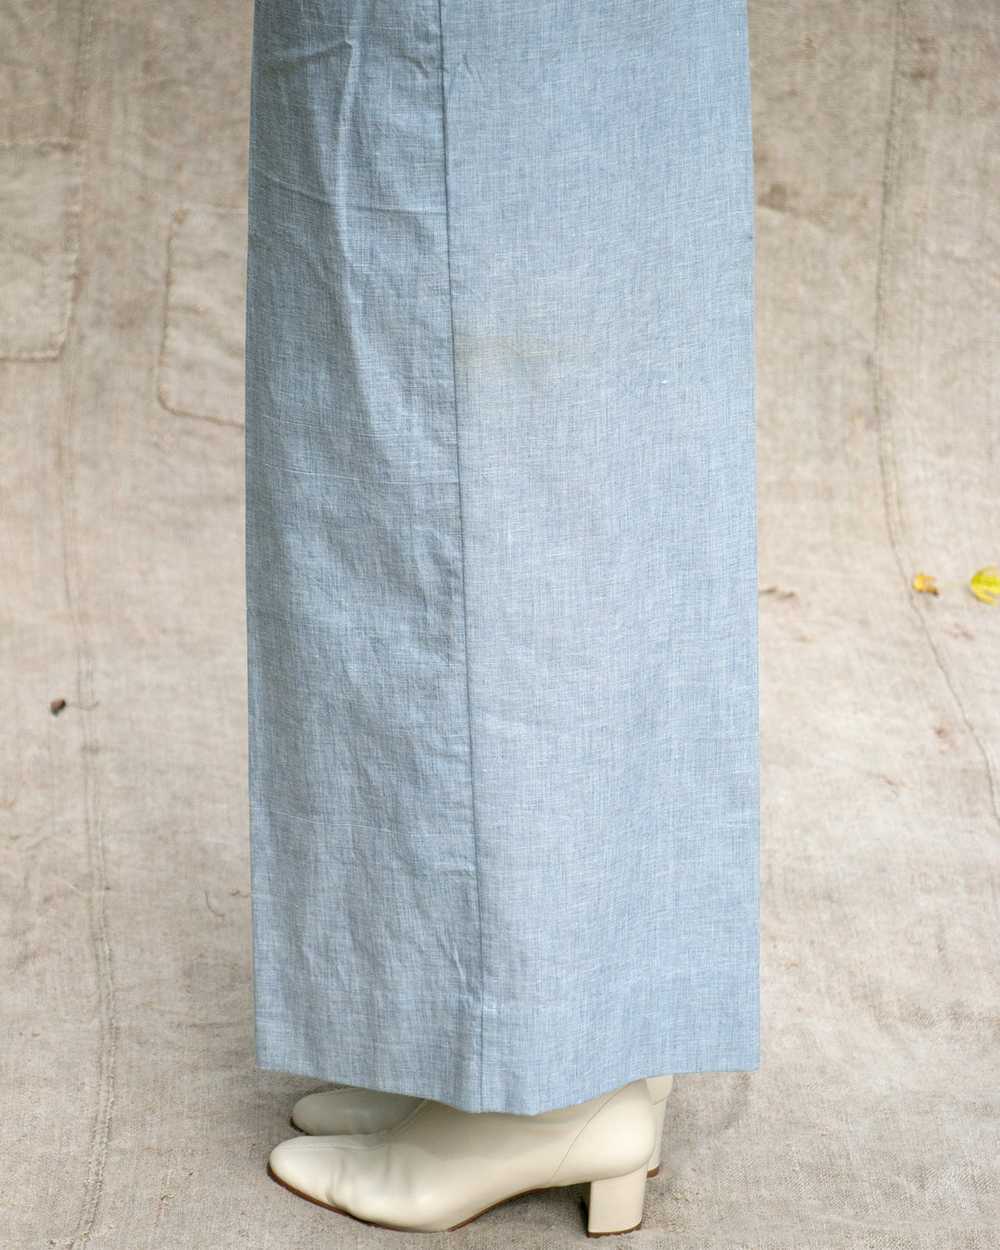 1940's Repro Overalls in Chambray - image 8